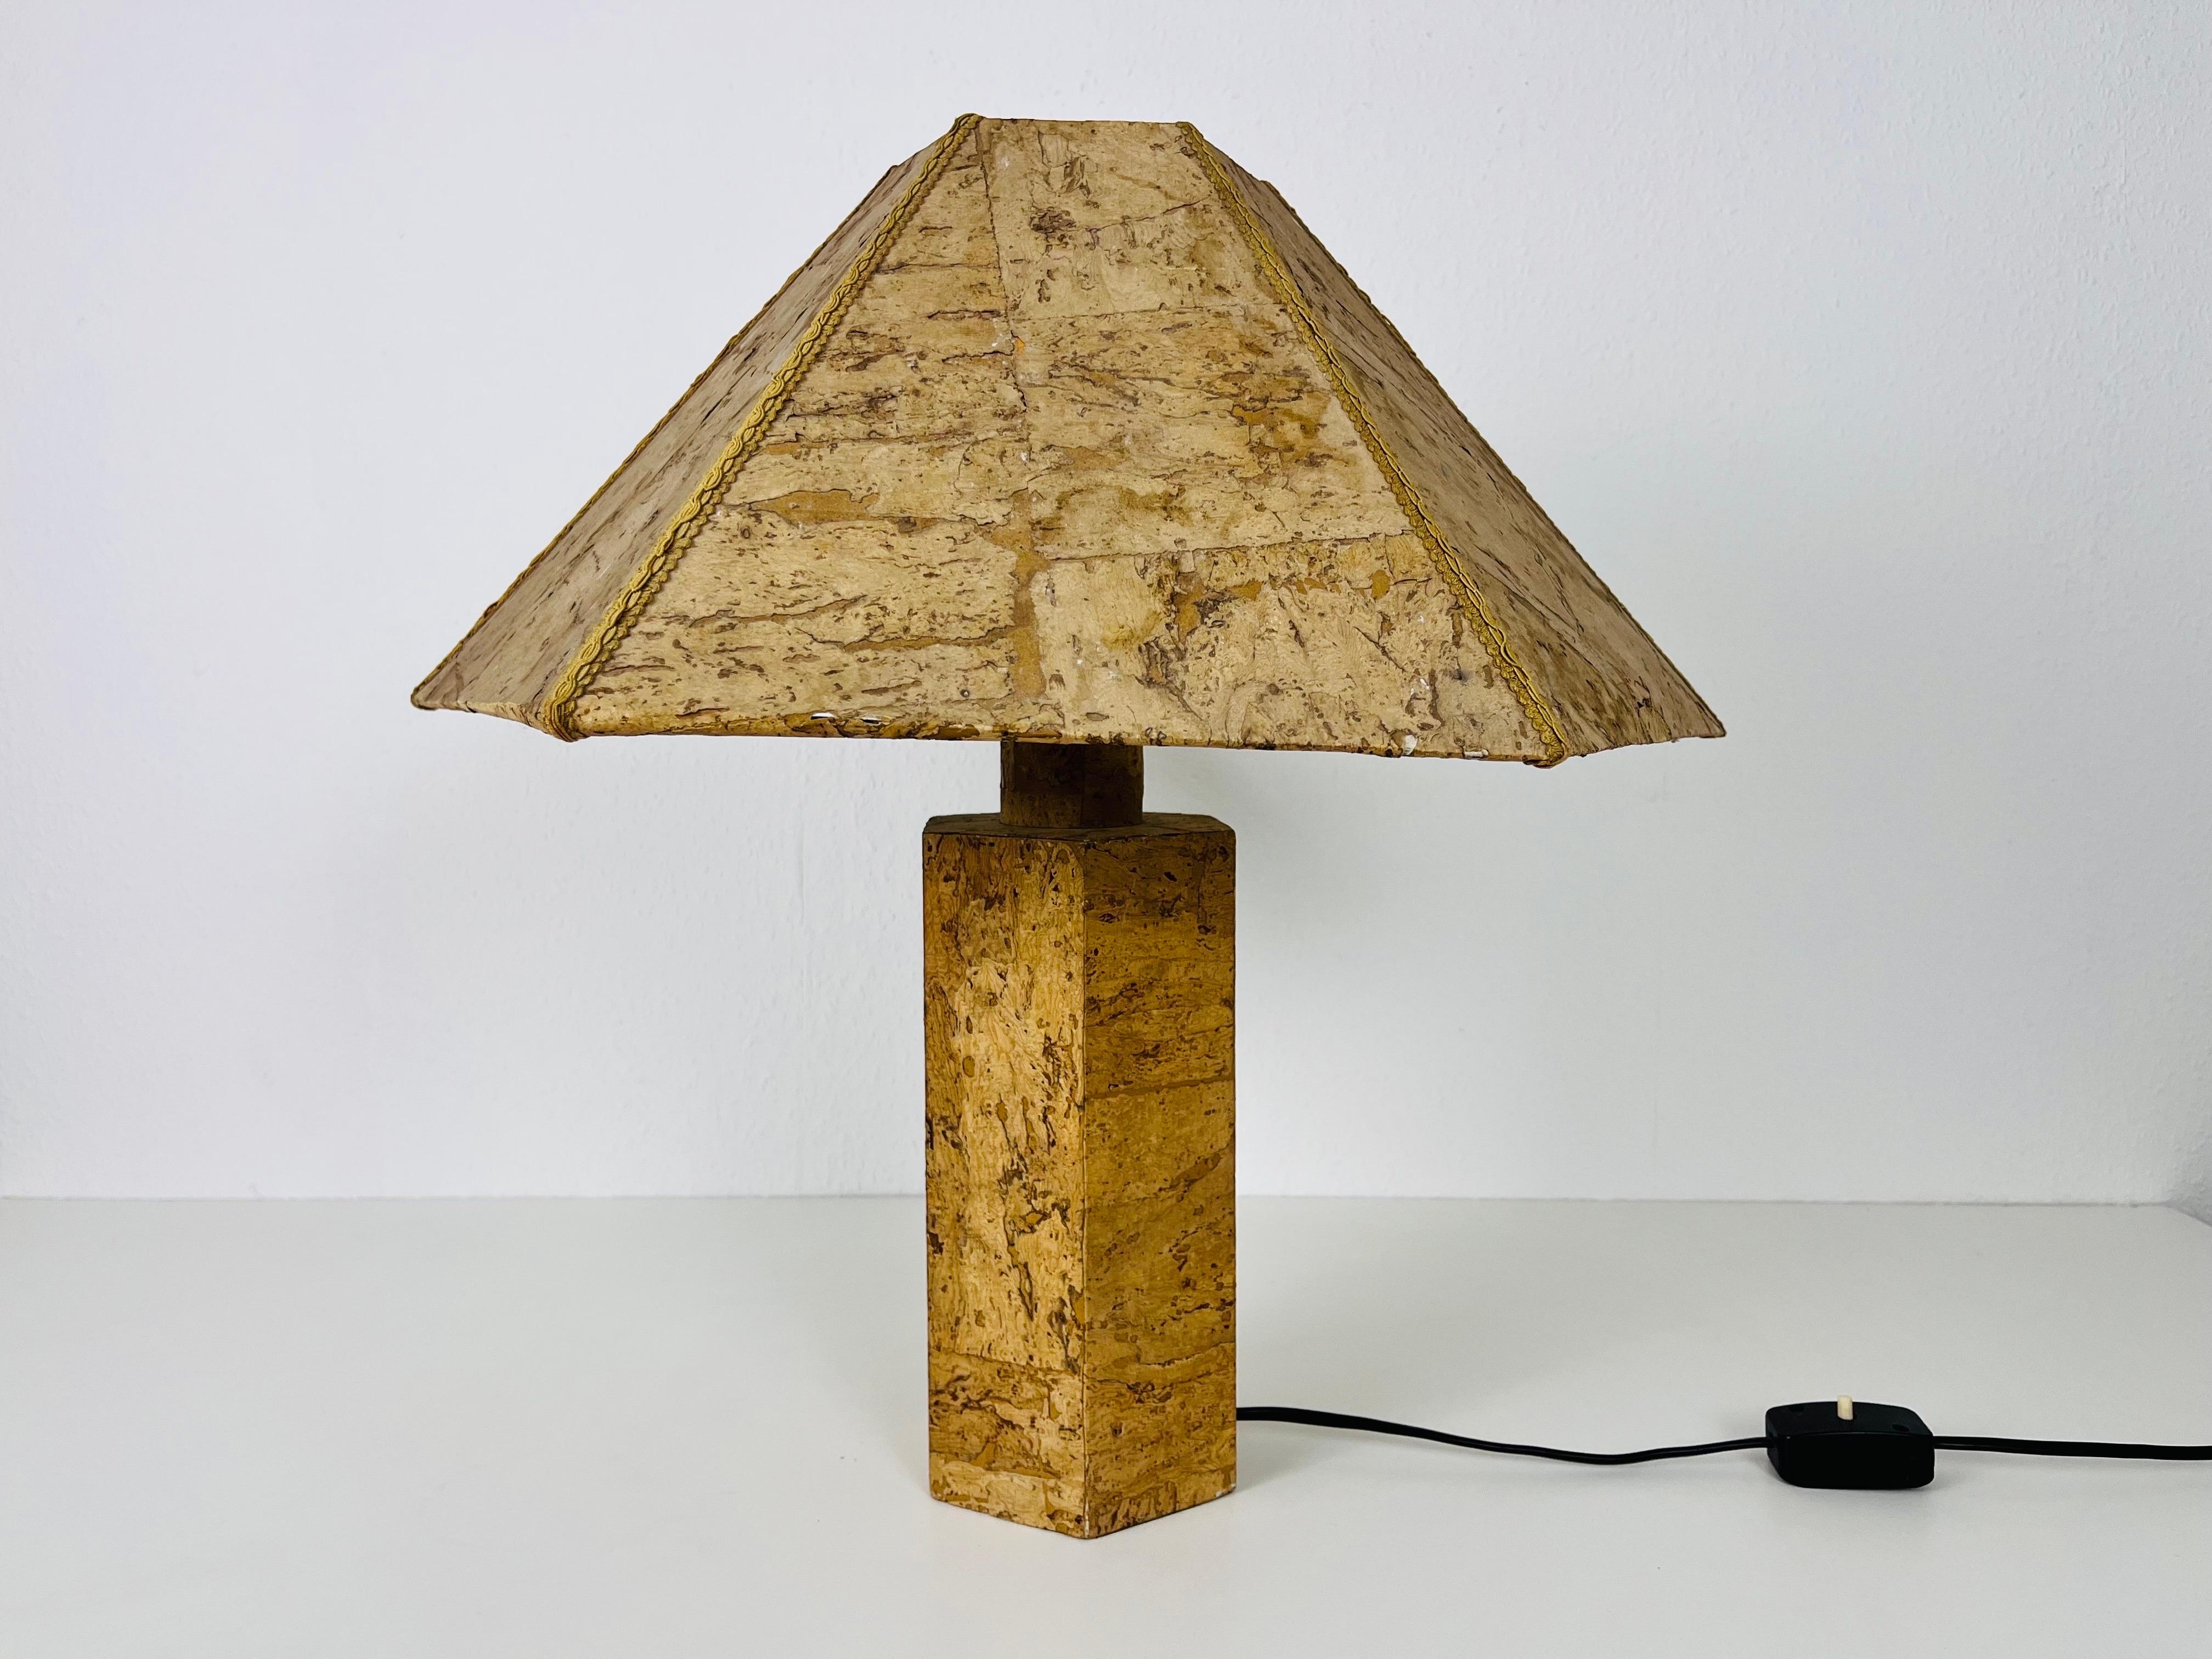 A german table lamp made in the 1960s. The lighting has an exceptional design which is similar to the table lamps made by Ingo Maurer. It is made of cork.

The light requires one E27 (US E26) light bulb. Works with both 120/220V. Good vintage